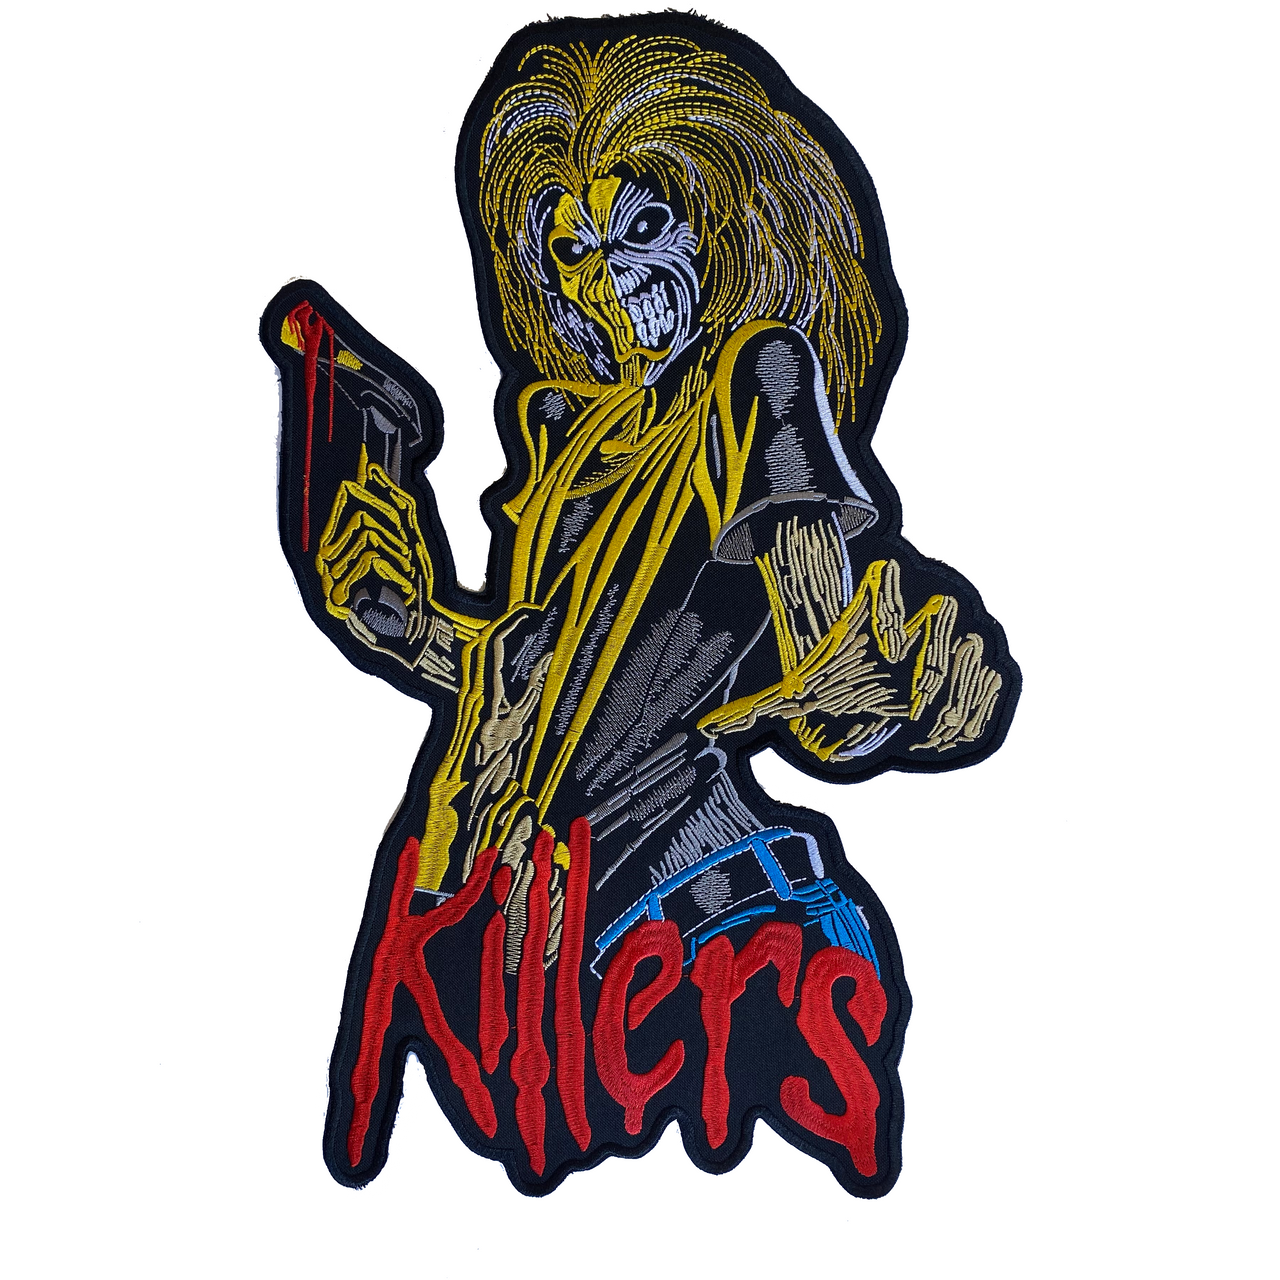 Iron Maiden Killers Back Patch